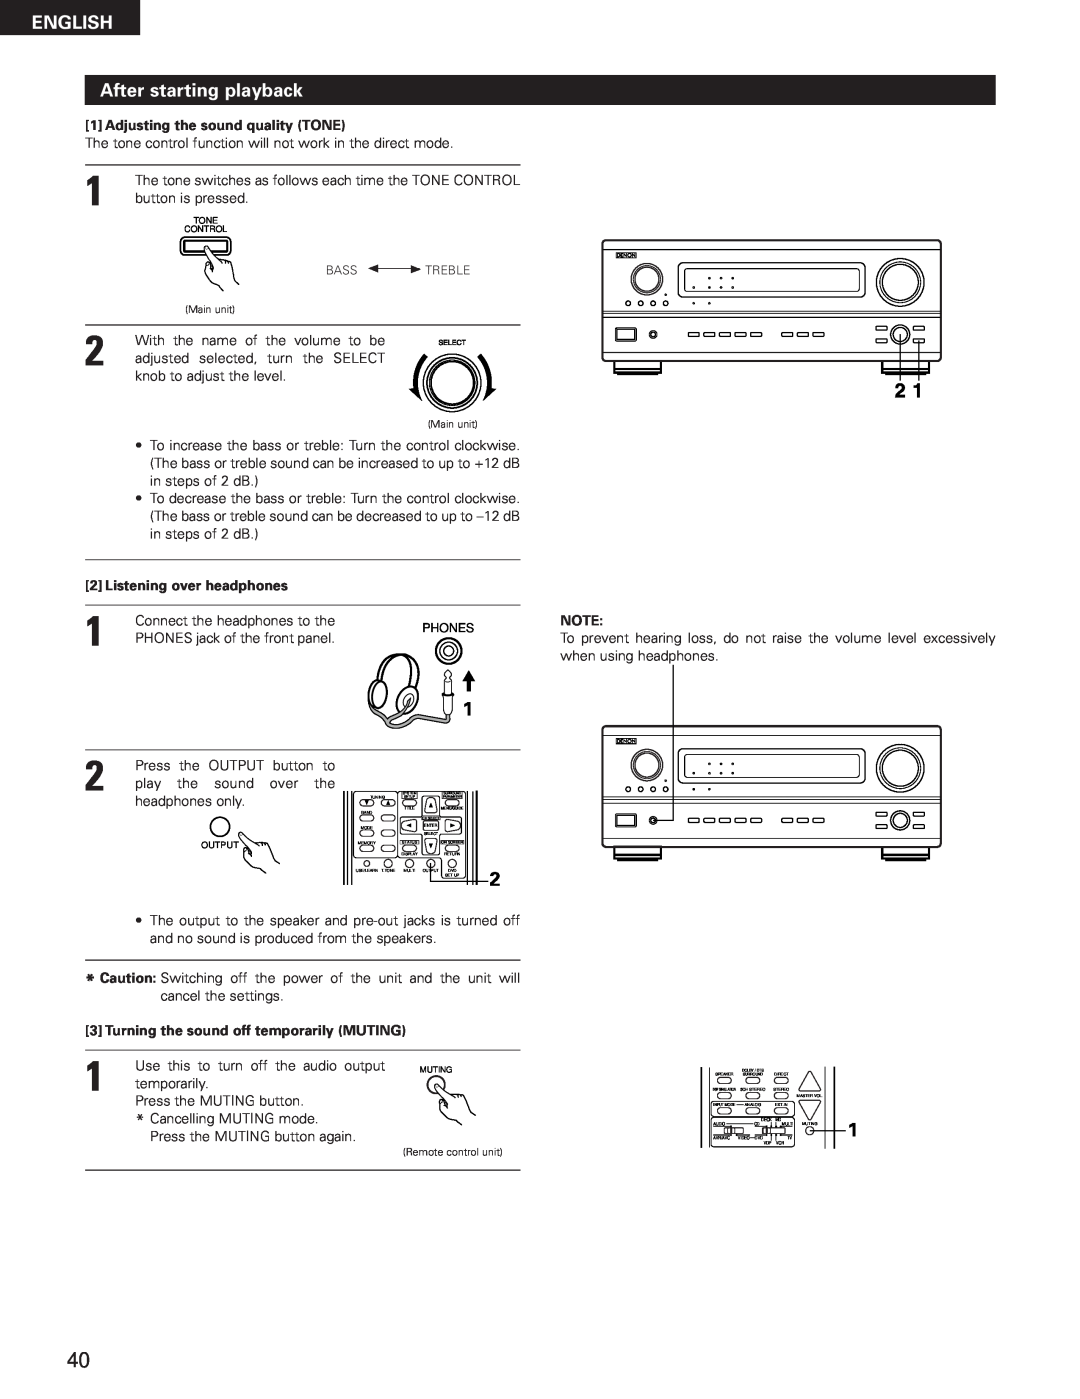 Denon AVR-3300 manual ENGLISH After starting playback, Adjusting the sound quality TONE, 2Listening over headphones 